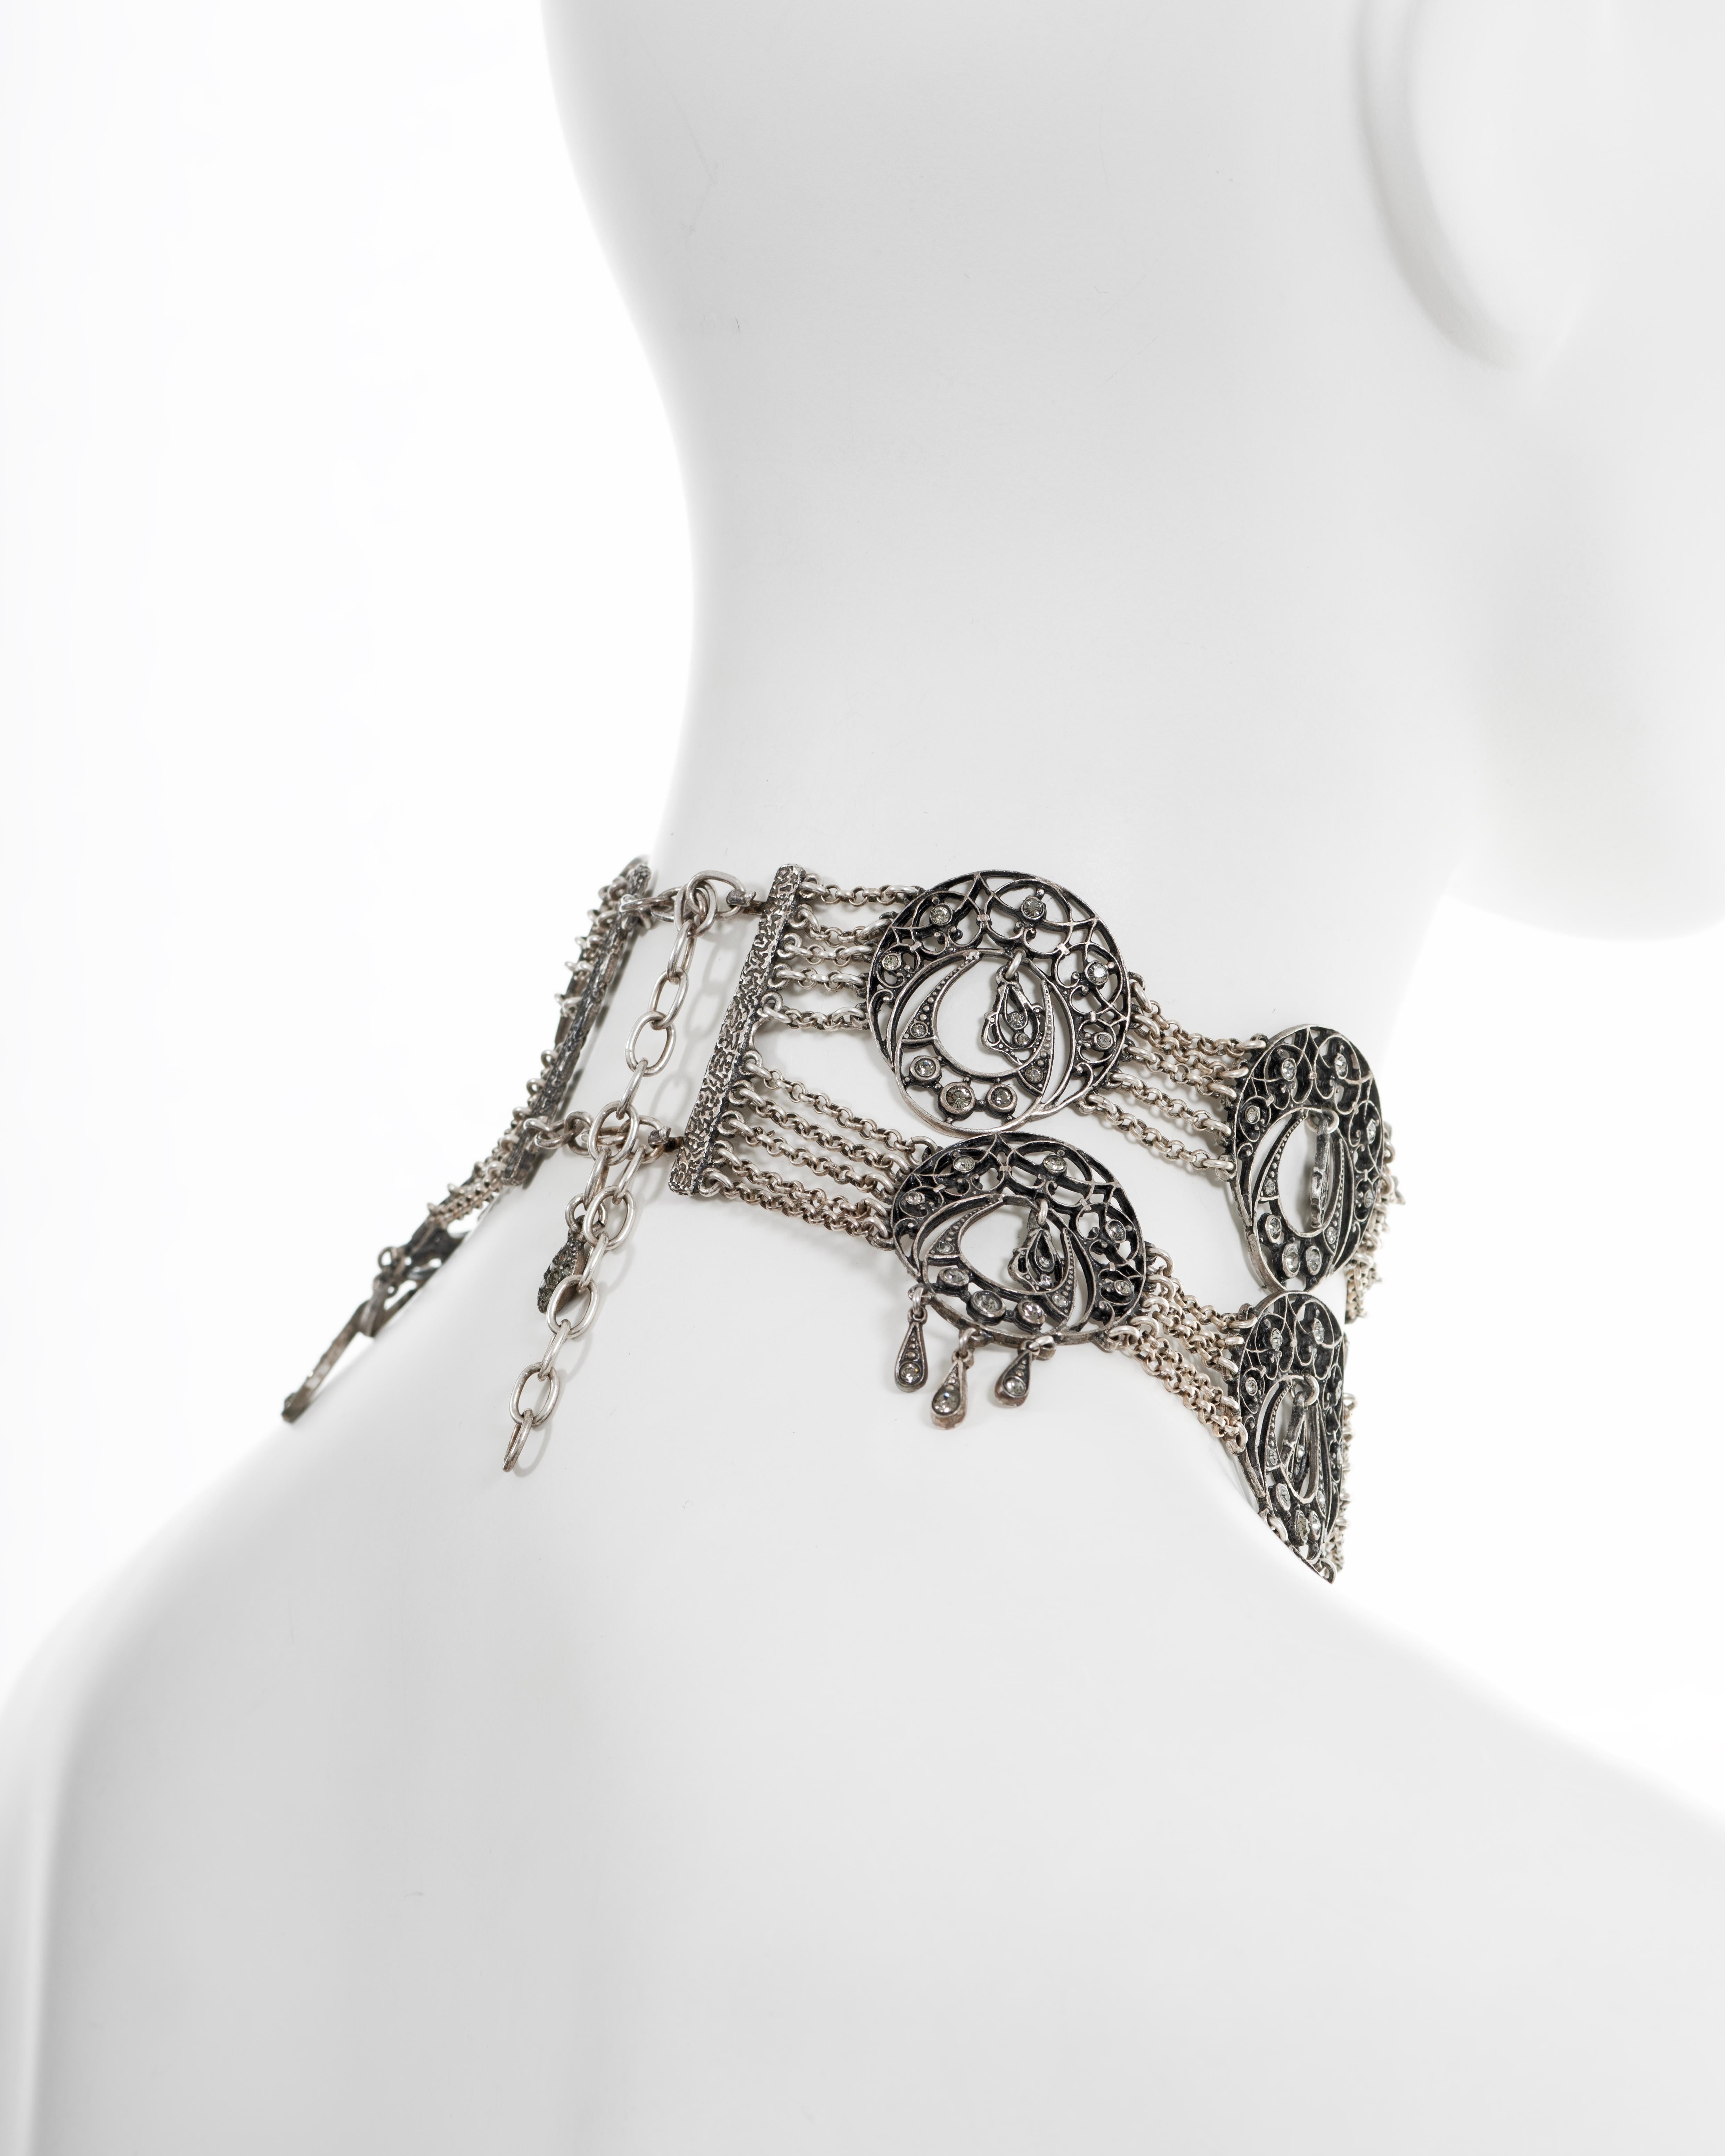 Christian Dior by John Galliano antique-style filigree choker necklace, ss 1999 For Sale 1